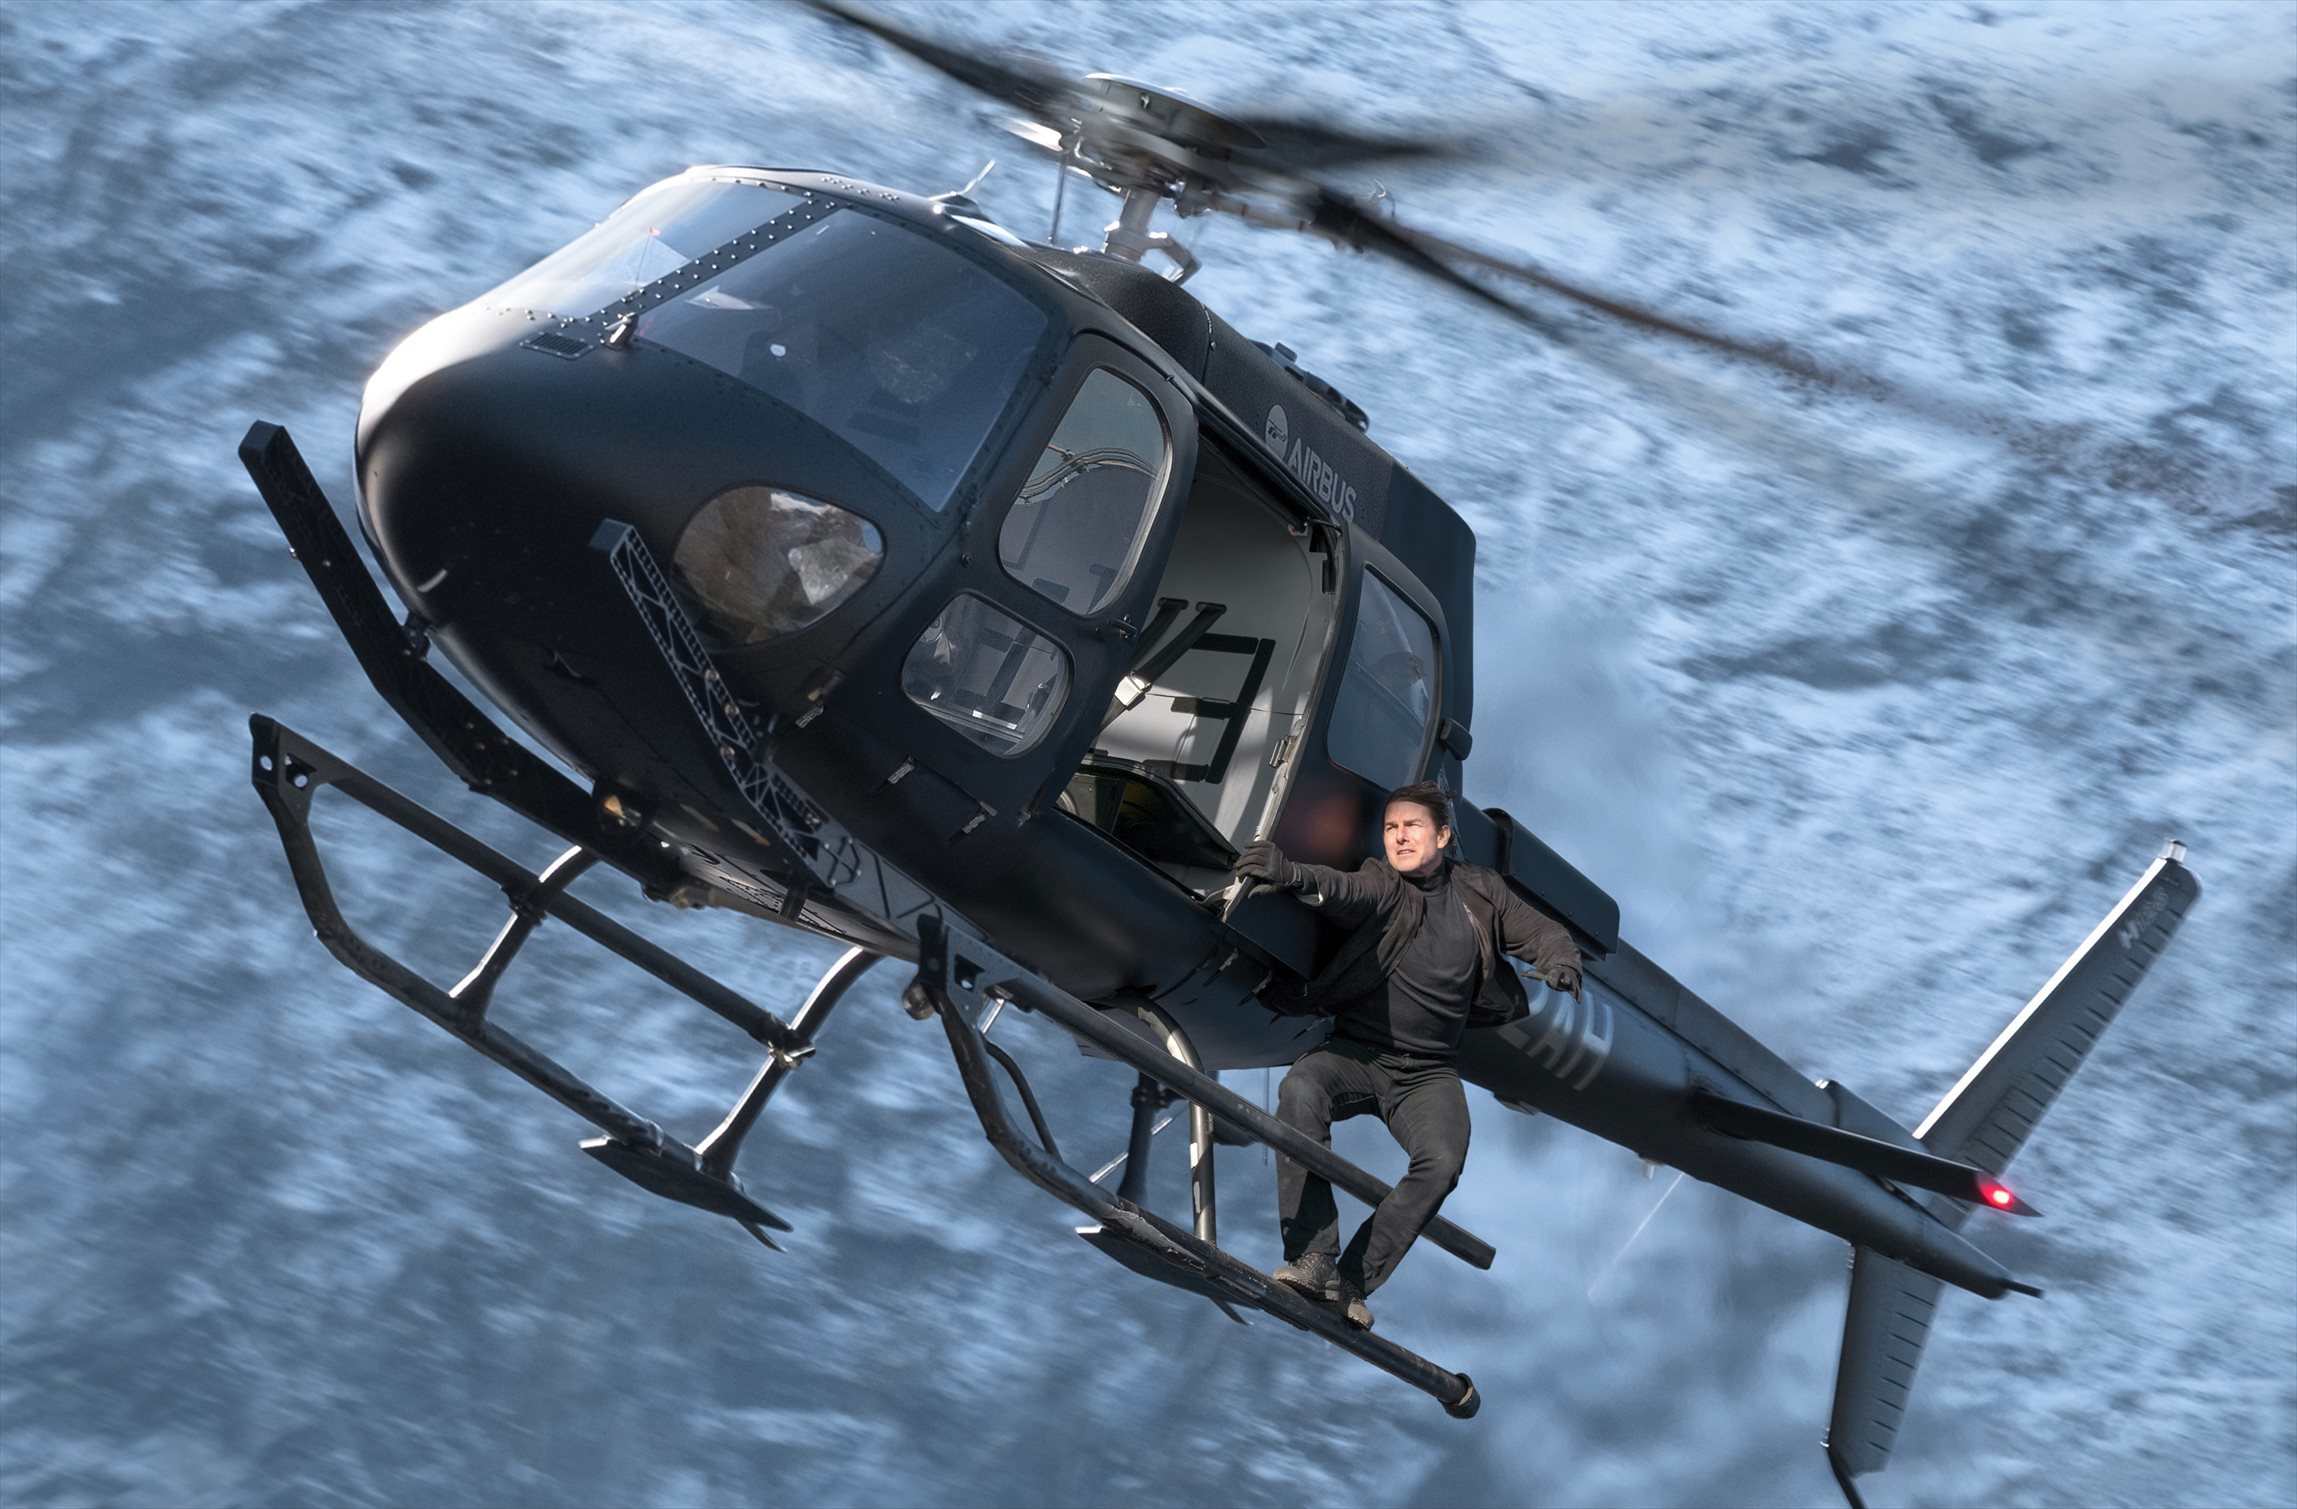 Tom Cruise hanging onto a helicopter